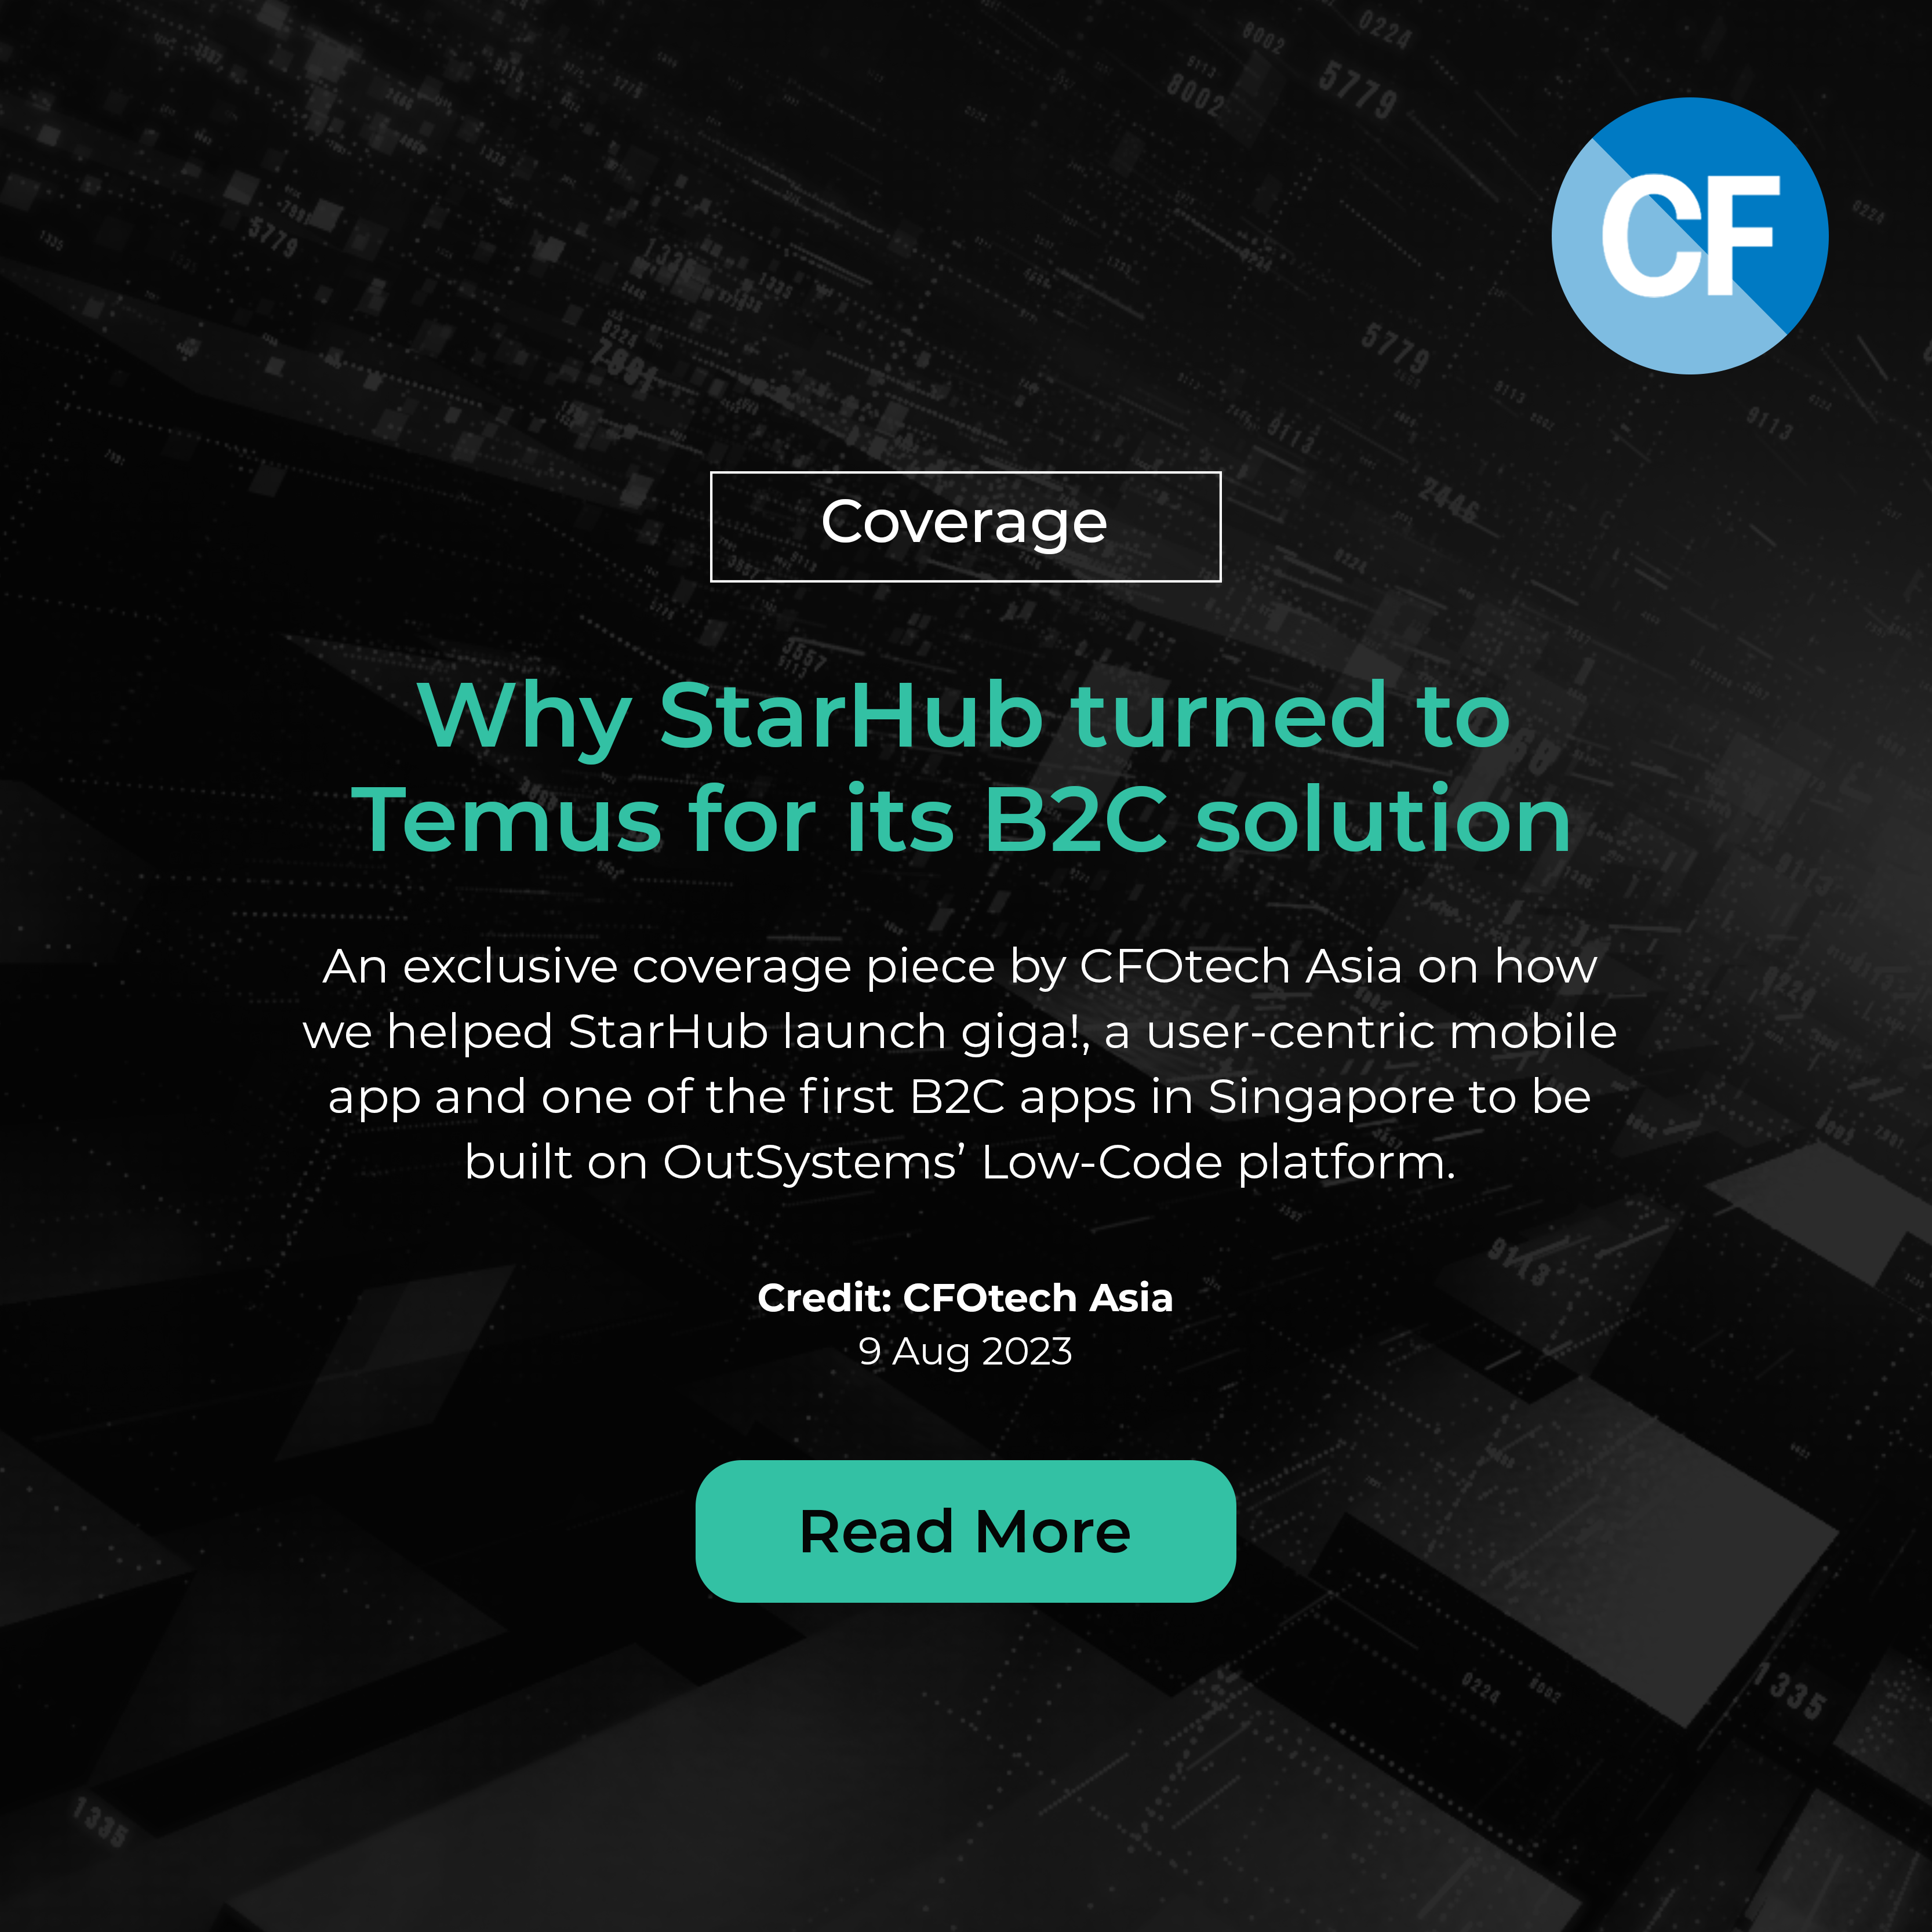 Coverage - CFOtech Asia exclusive: Why StarHub turned to Temus for its B2C solution